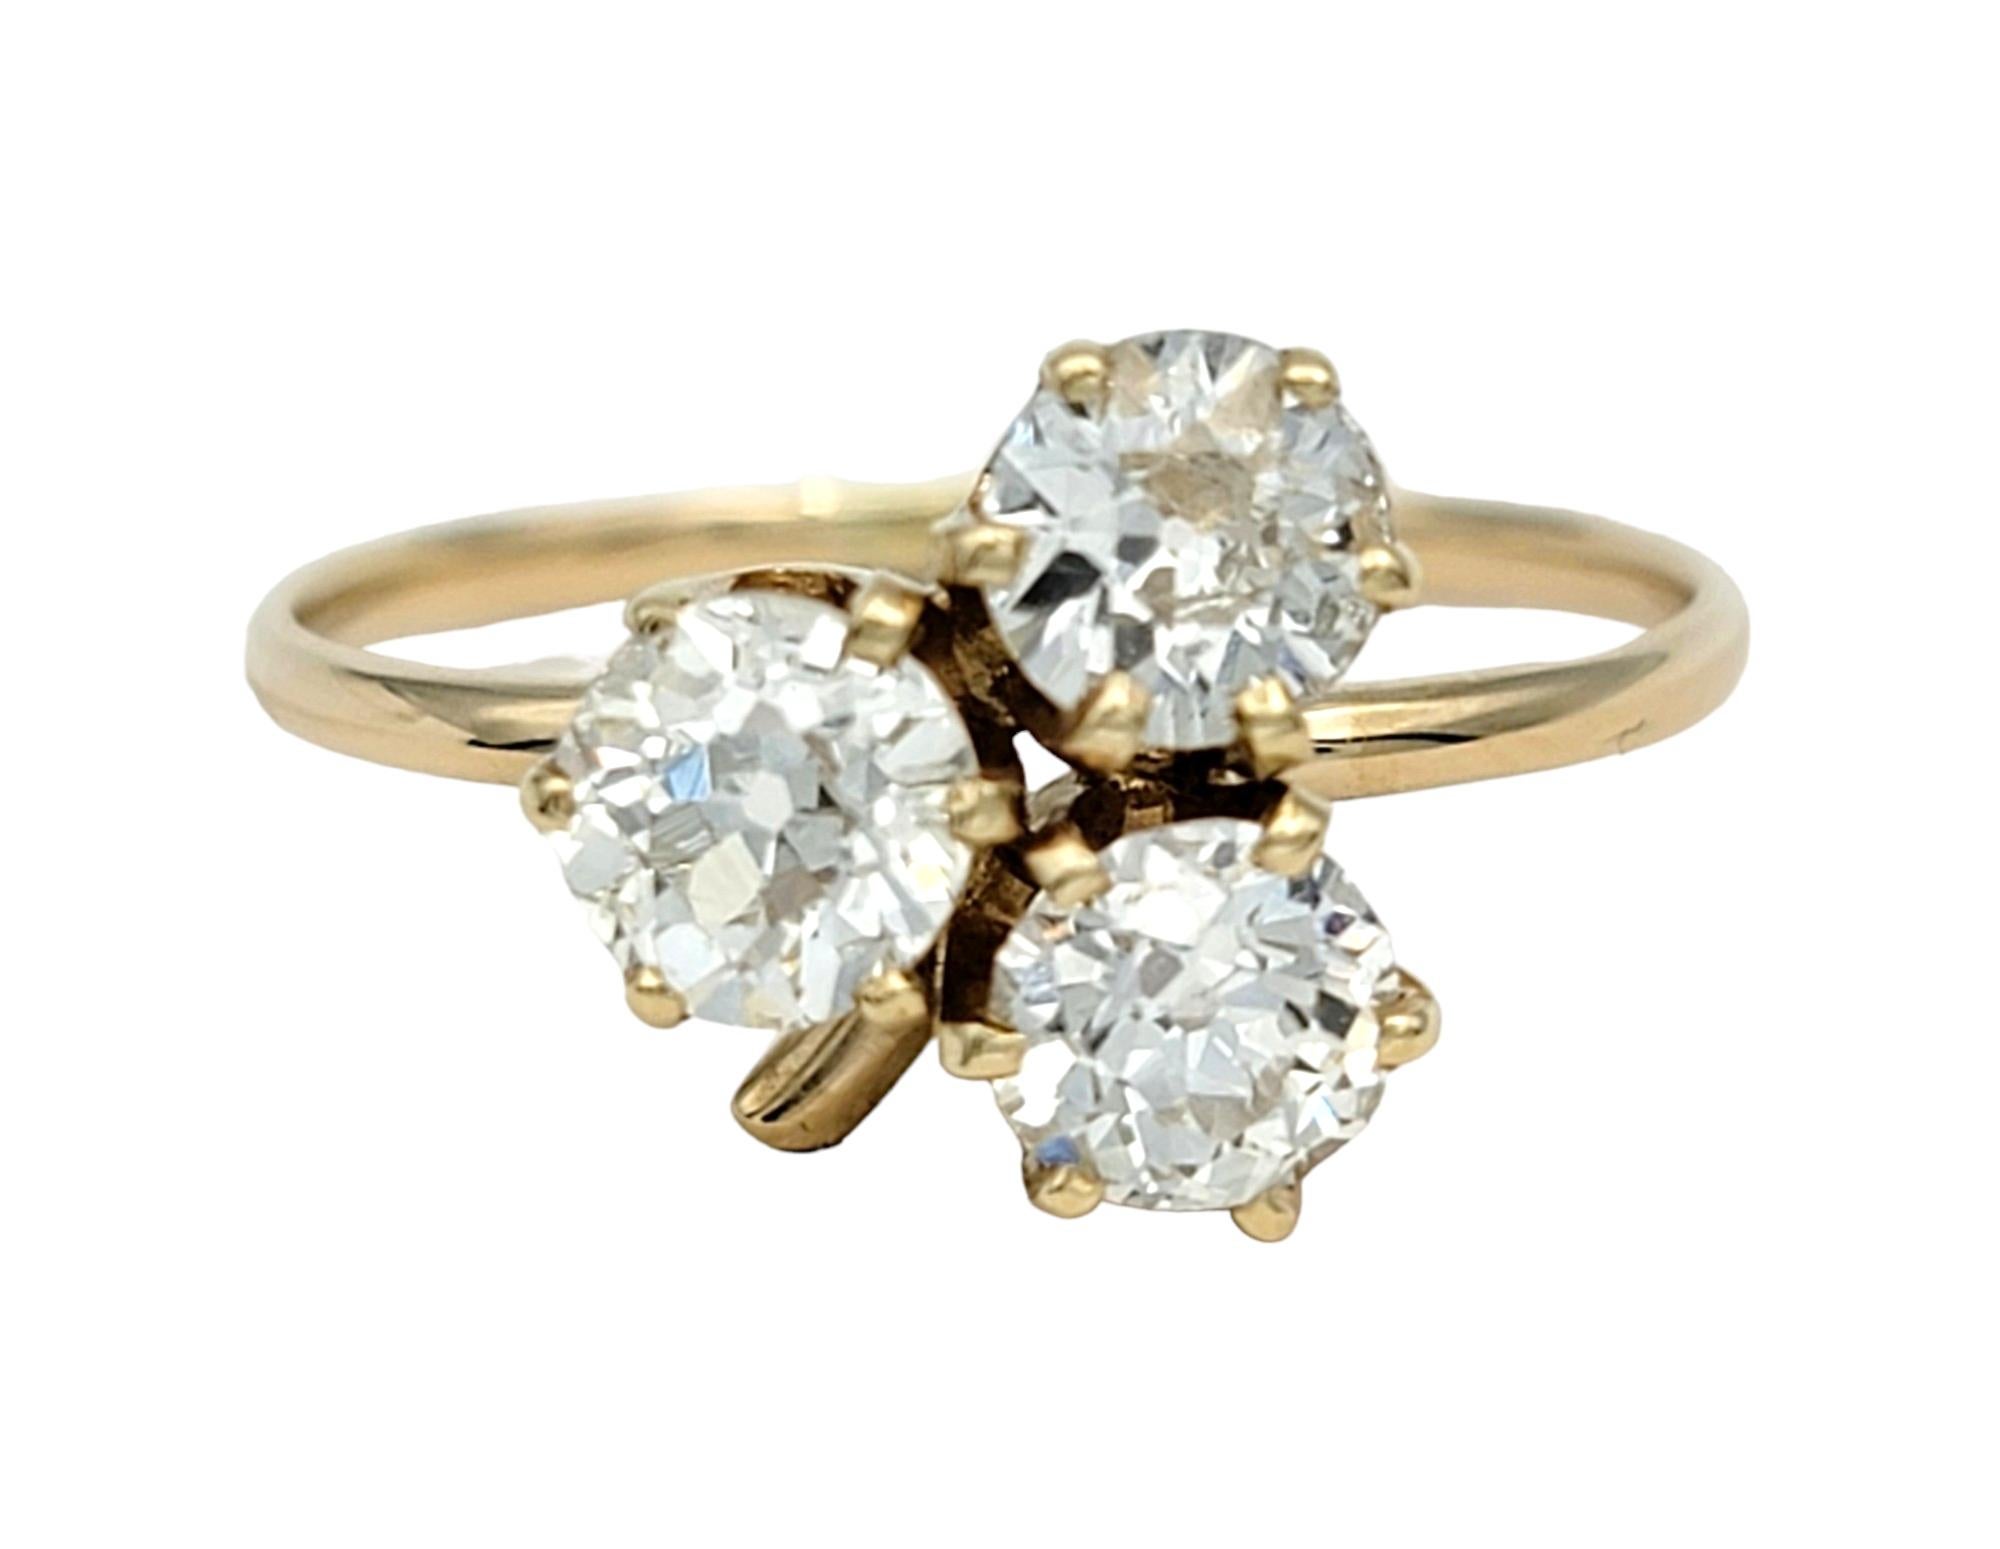 Antique Old Mine Cut Diamond Trio Clover Motif Ring in 14 Karat Yellow Gold In Good Condition For Sale In Scottsdale, AZ